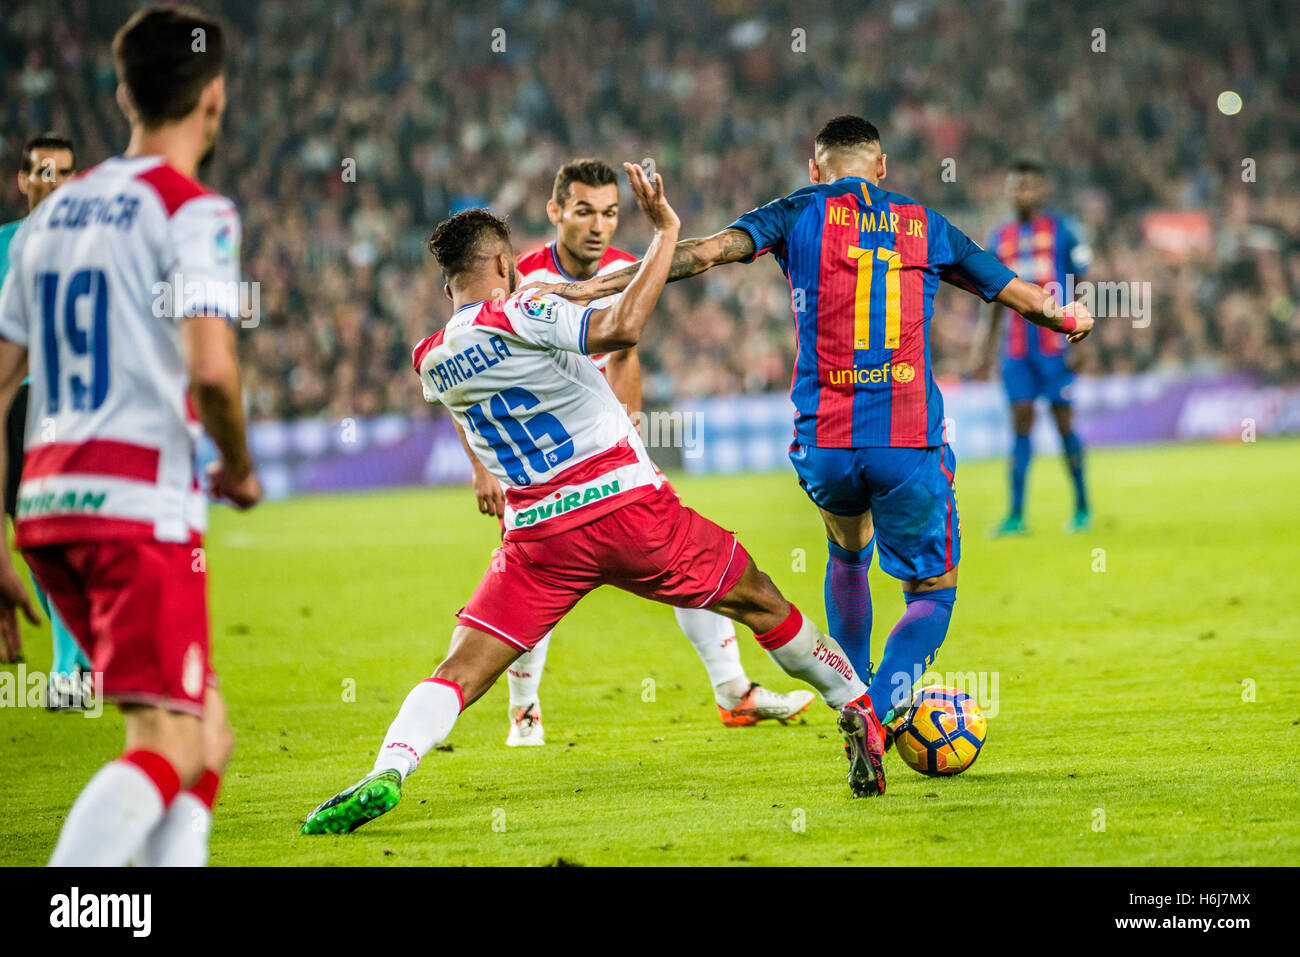 Barcelona, Catalonia, Spain. 29th Oct, 2016. FC Barcelona forward NEYMAR JR. in action in the LaLiga match between FC Barcelona and Granada CF at the Camp Nou stadium in Barcelona © Matthias Oesterle/ZUMA Wire/Alamy Live News Stock Photo